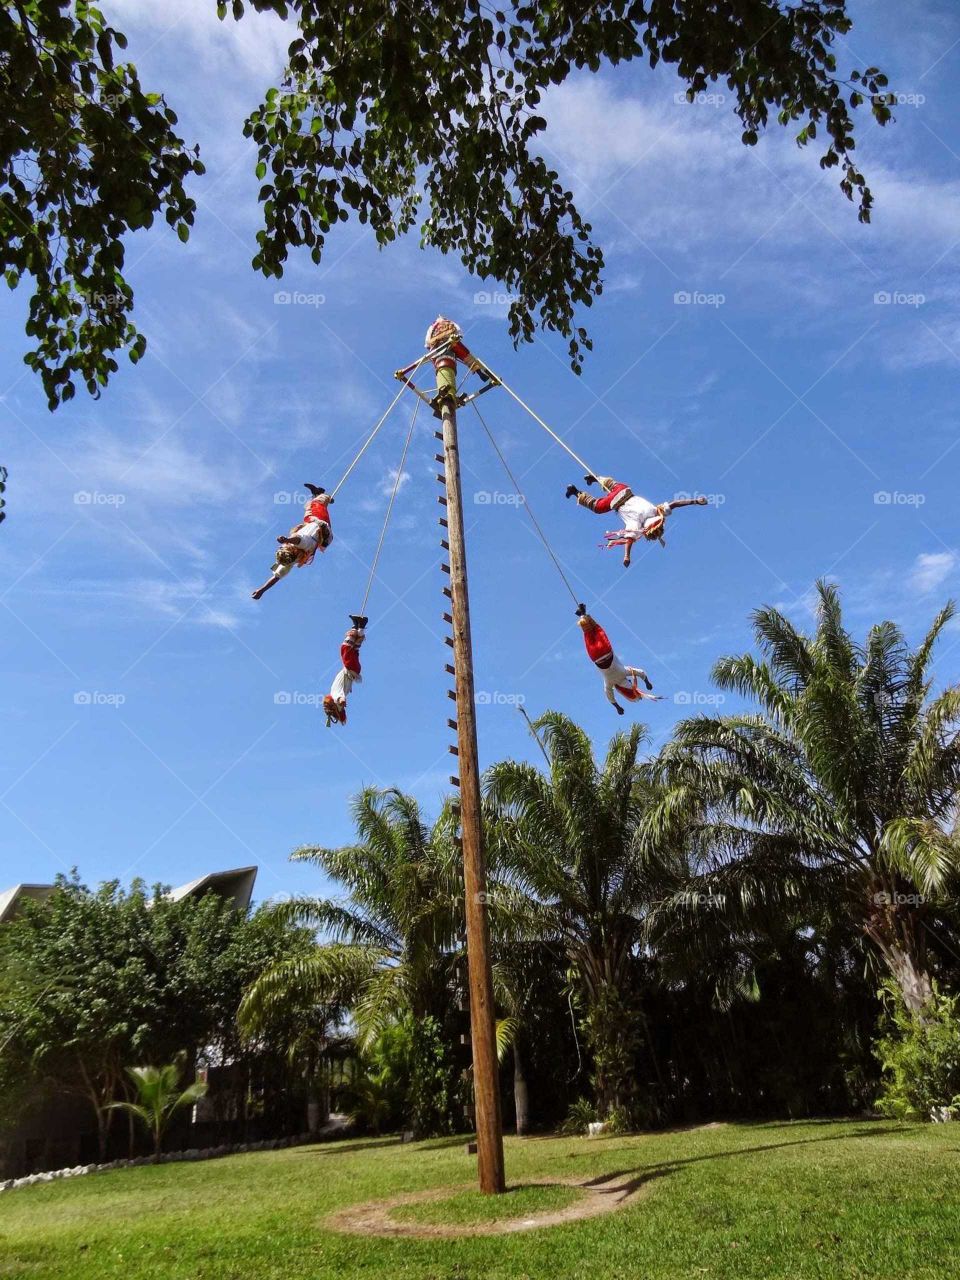 Swinging performers in Mexico